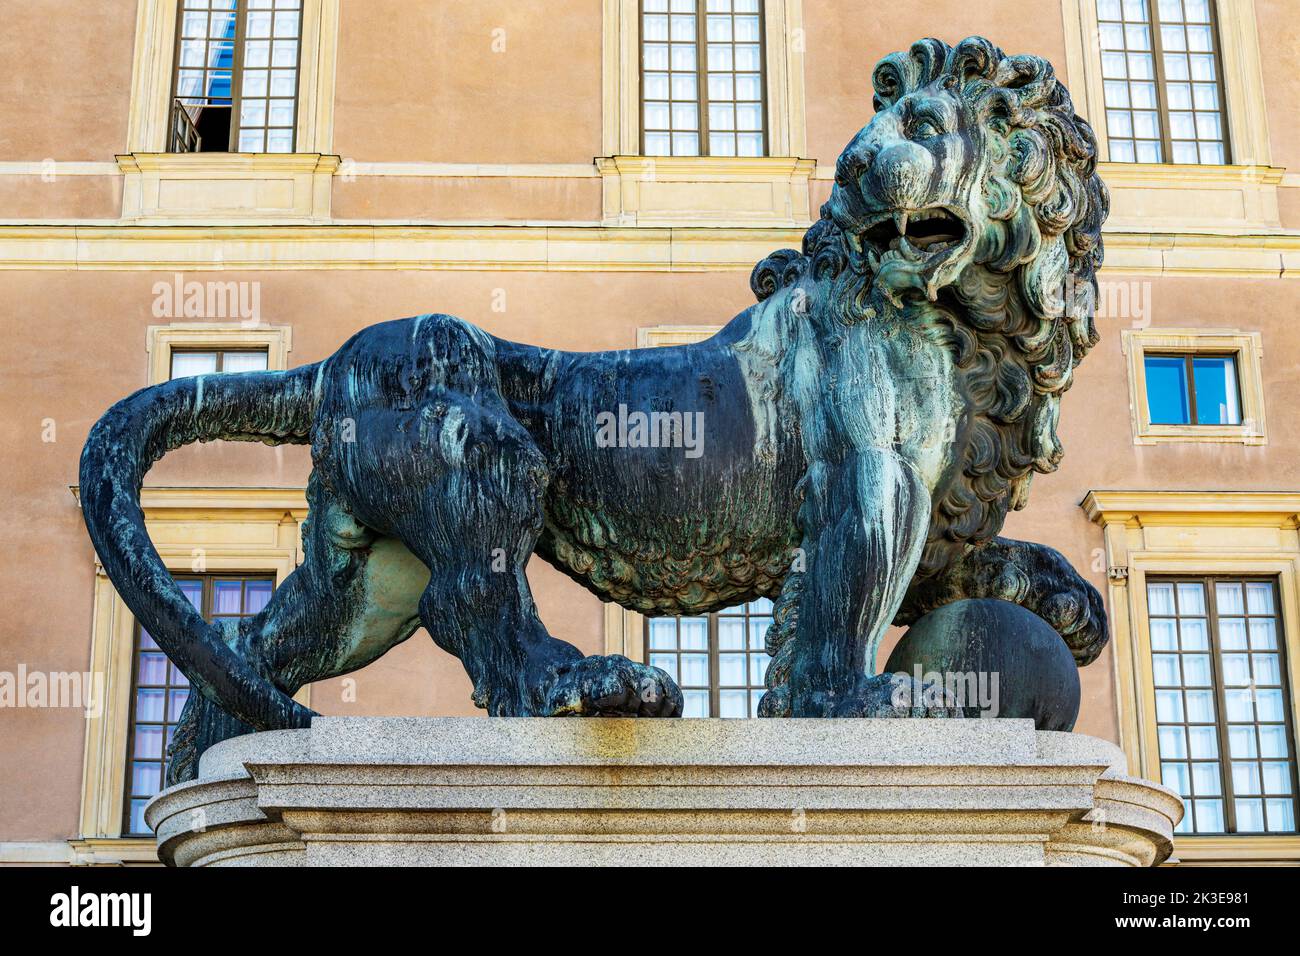 STOCKHOLM, SWEDEN - JULY 31, 2022: Lion Statue at the royal palace in the gamla stan area of the city. Stock Photo